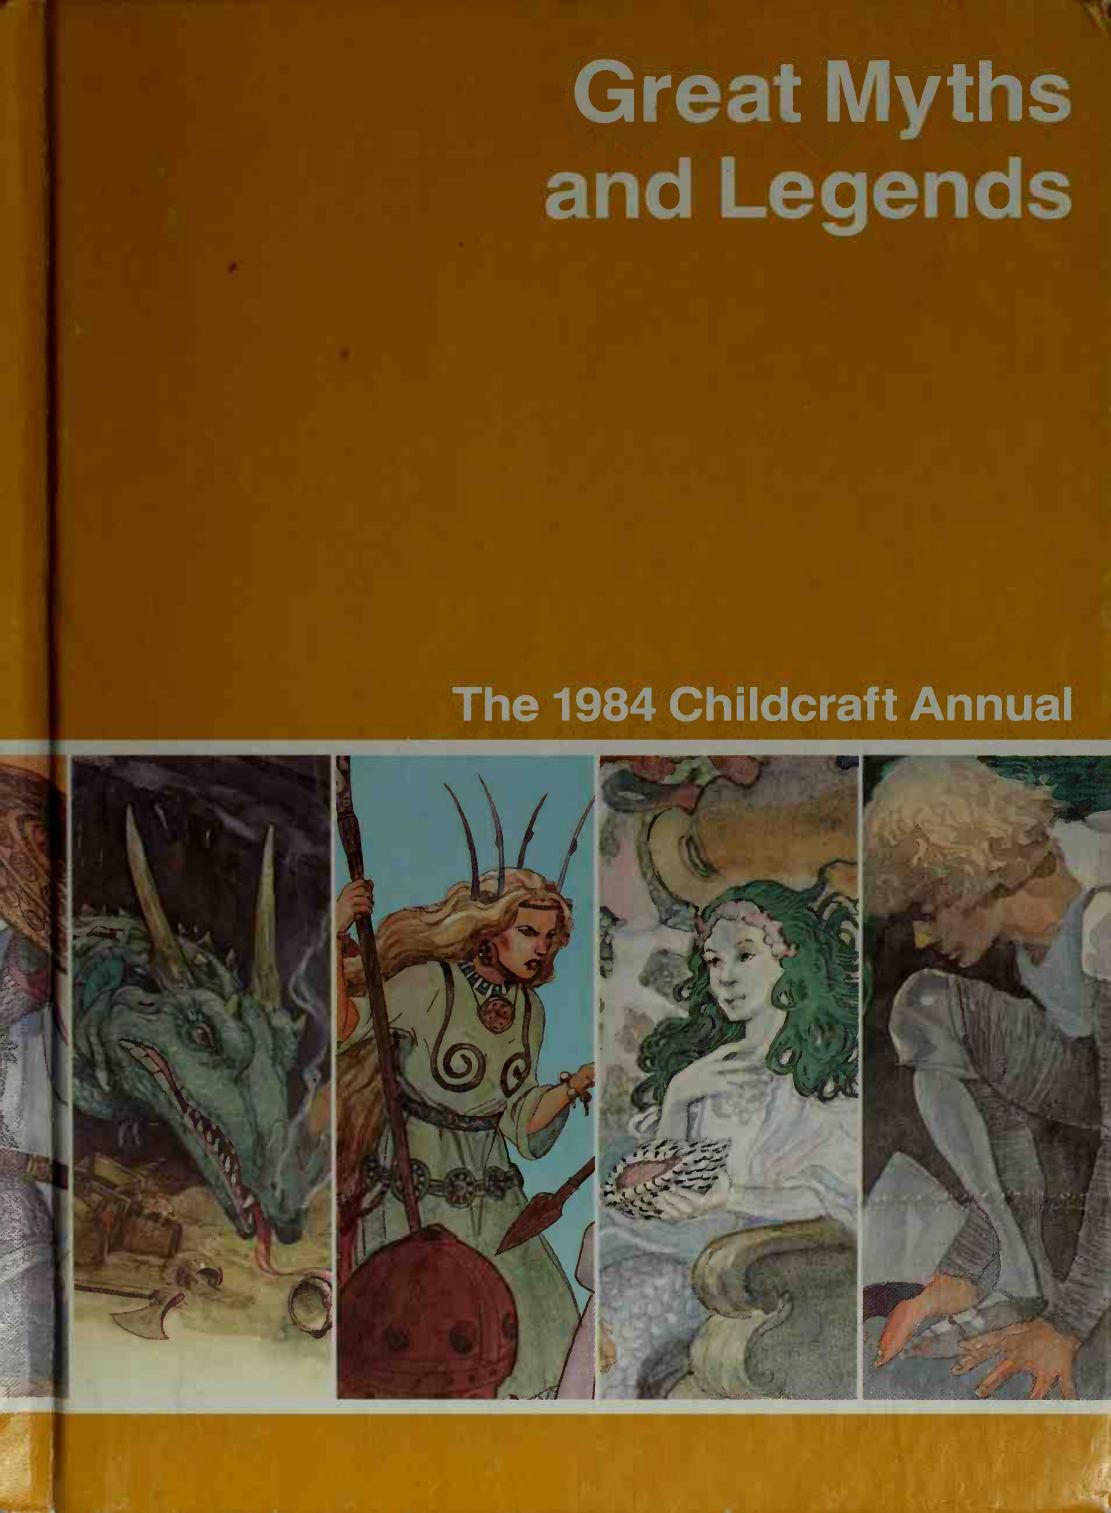 Great Myths and Legends: The 1984 Childcraft Annual